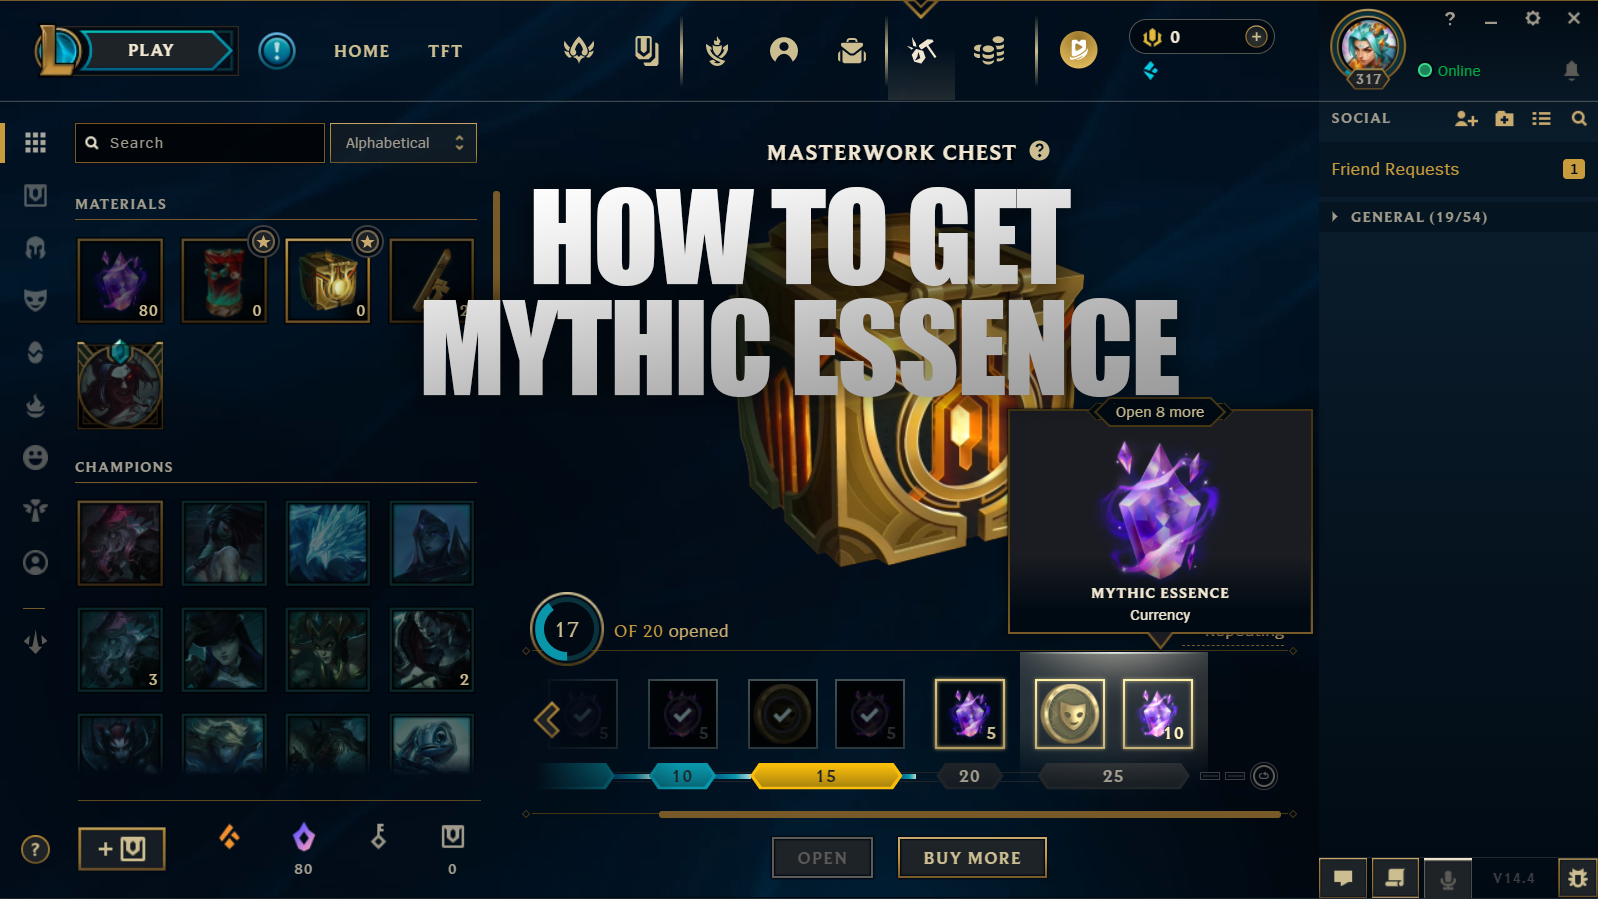 Acquiring Mythic Essence in League of Legends can be achieved through various methods, allowing players to customize their gaming experience with exclusive cosmetic items.